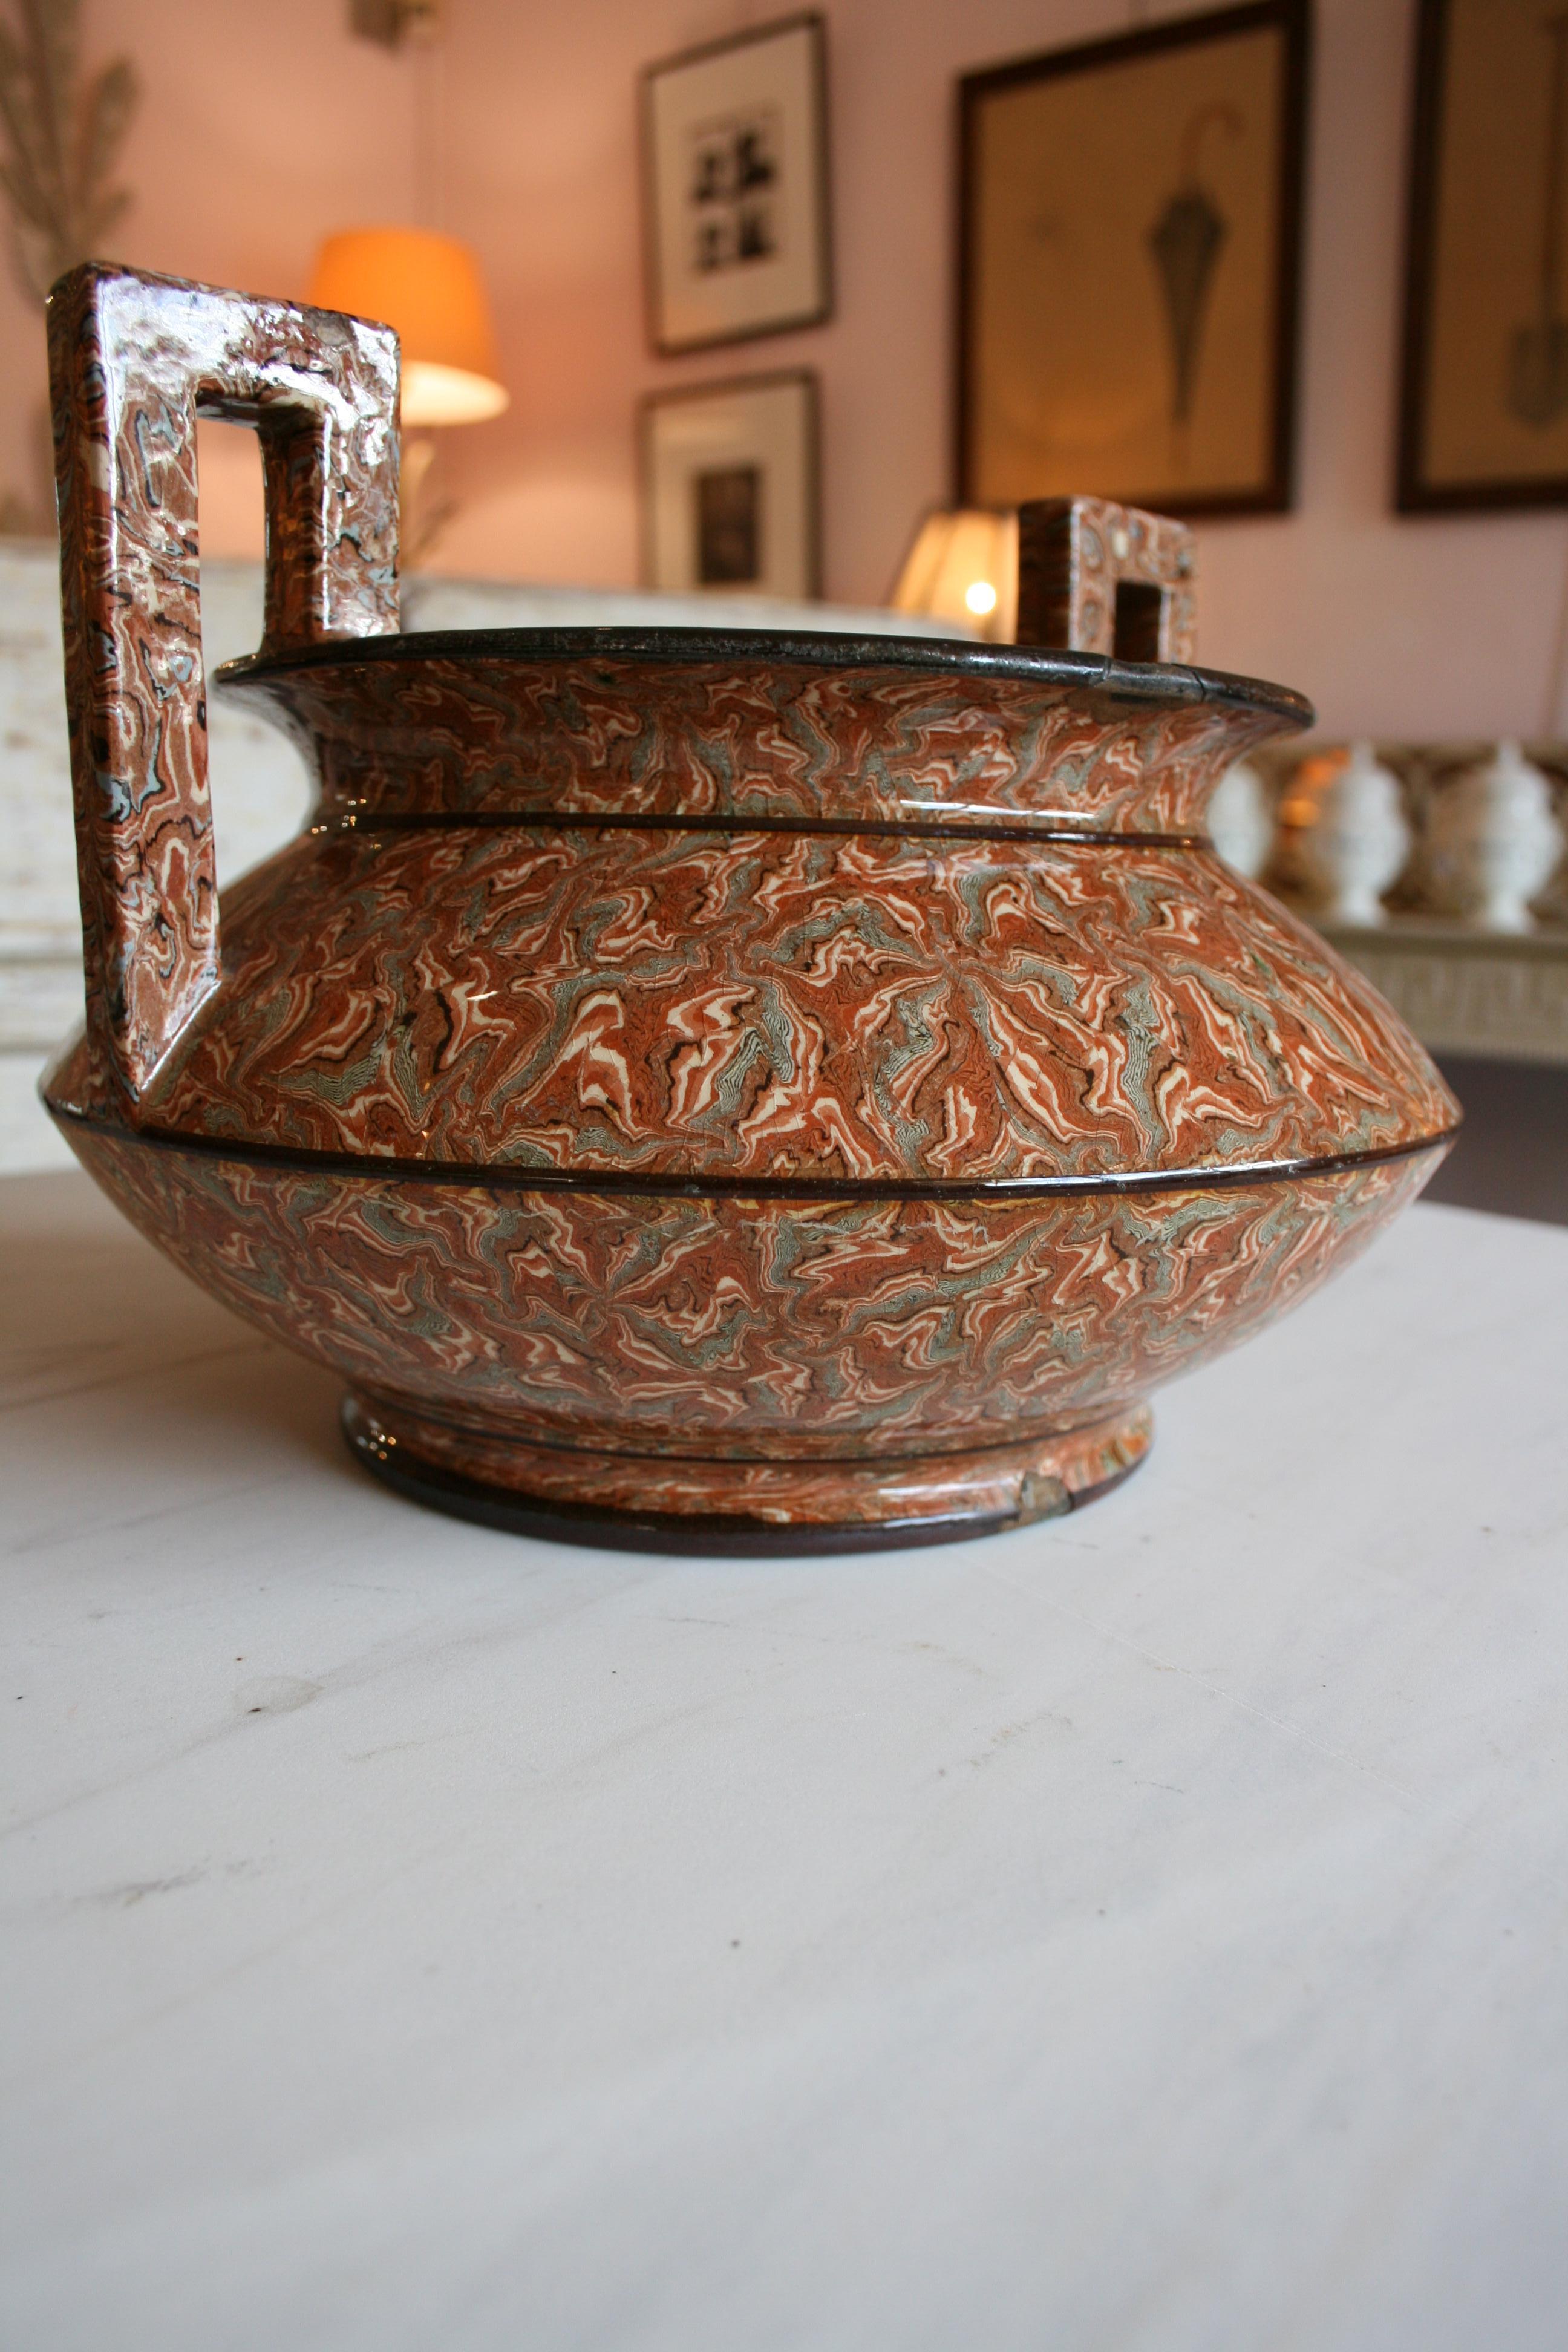 'Pichon' Provencal Agateware Vase with Greek Handles from Uzes Late 19th Century For Sale 2